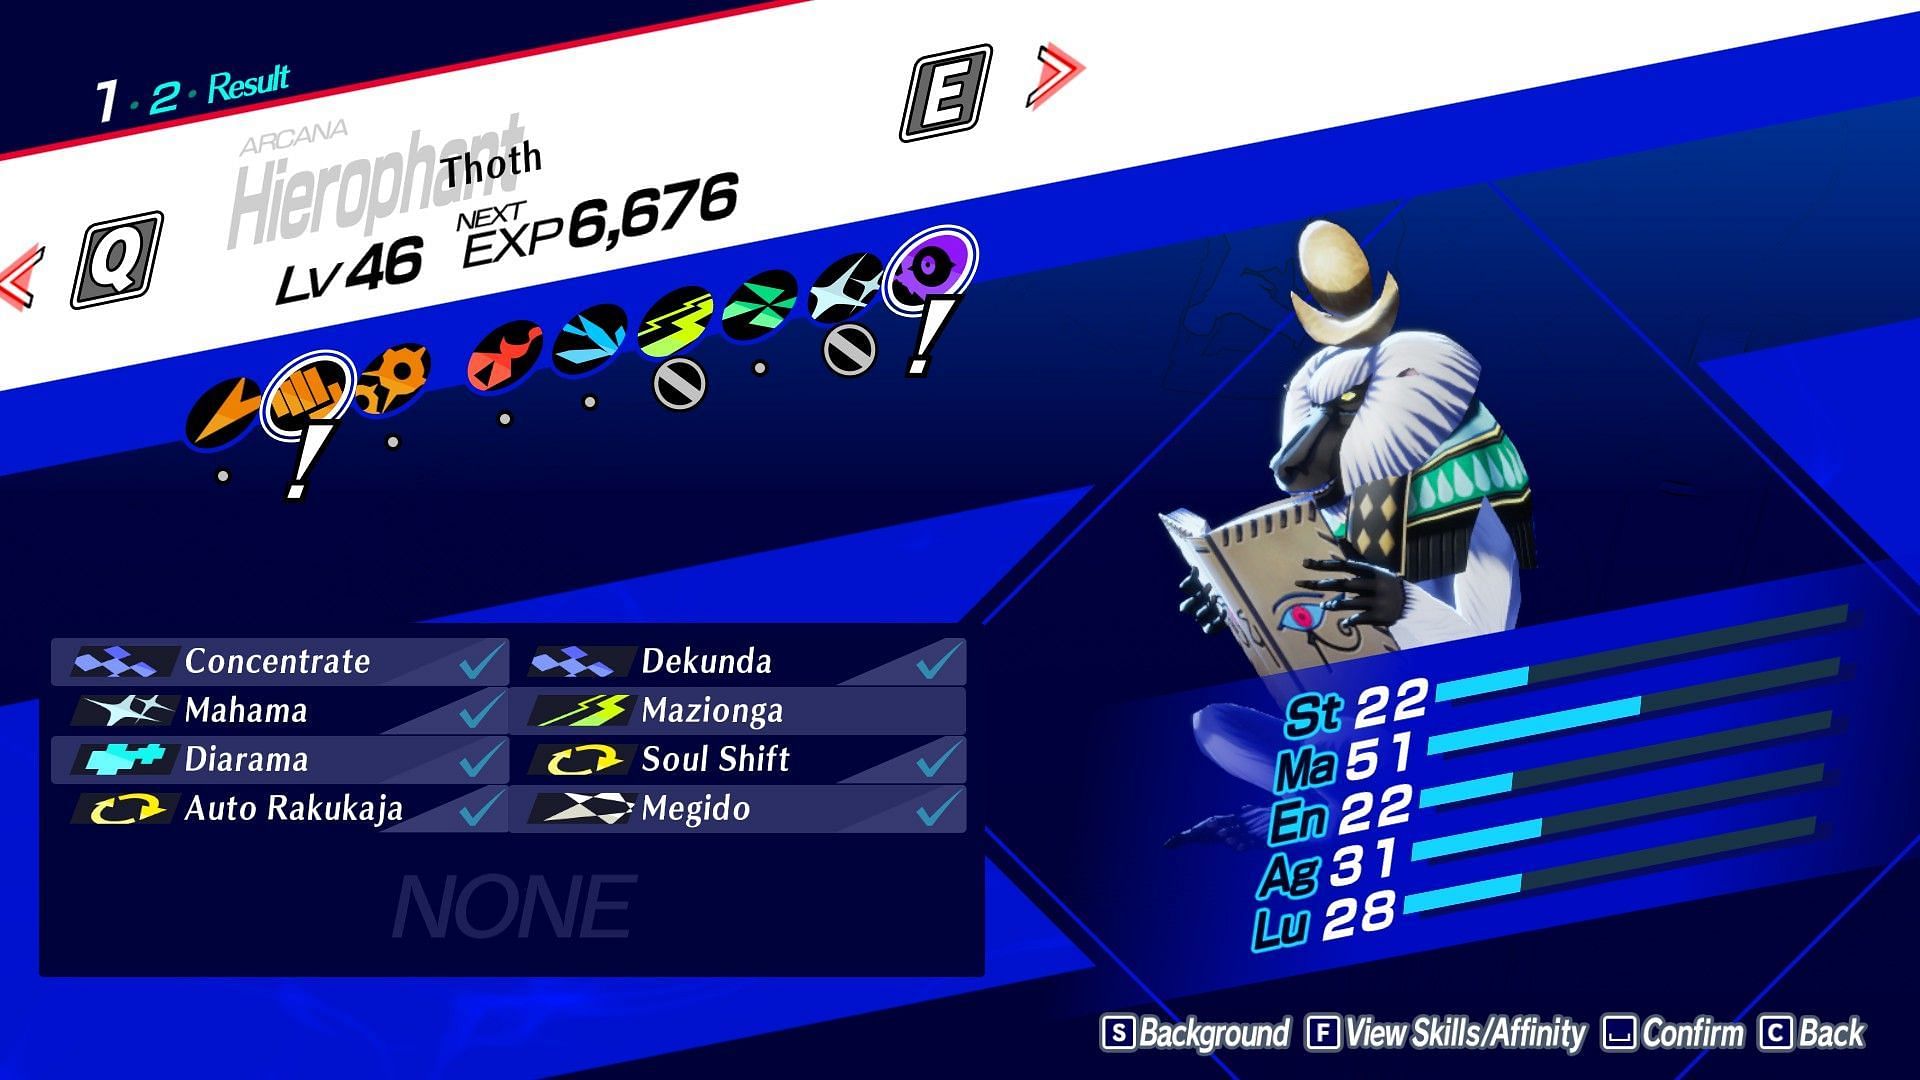 Thoth gives you access to one of the strongest Allmighty skills (Image via Atlus)